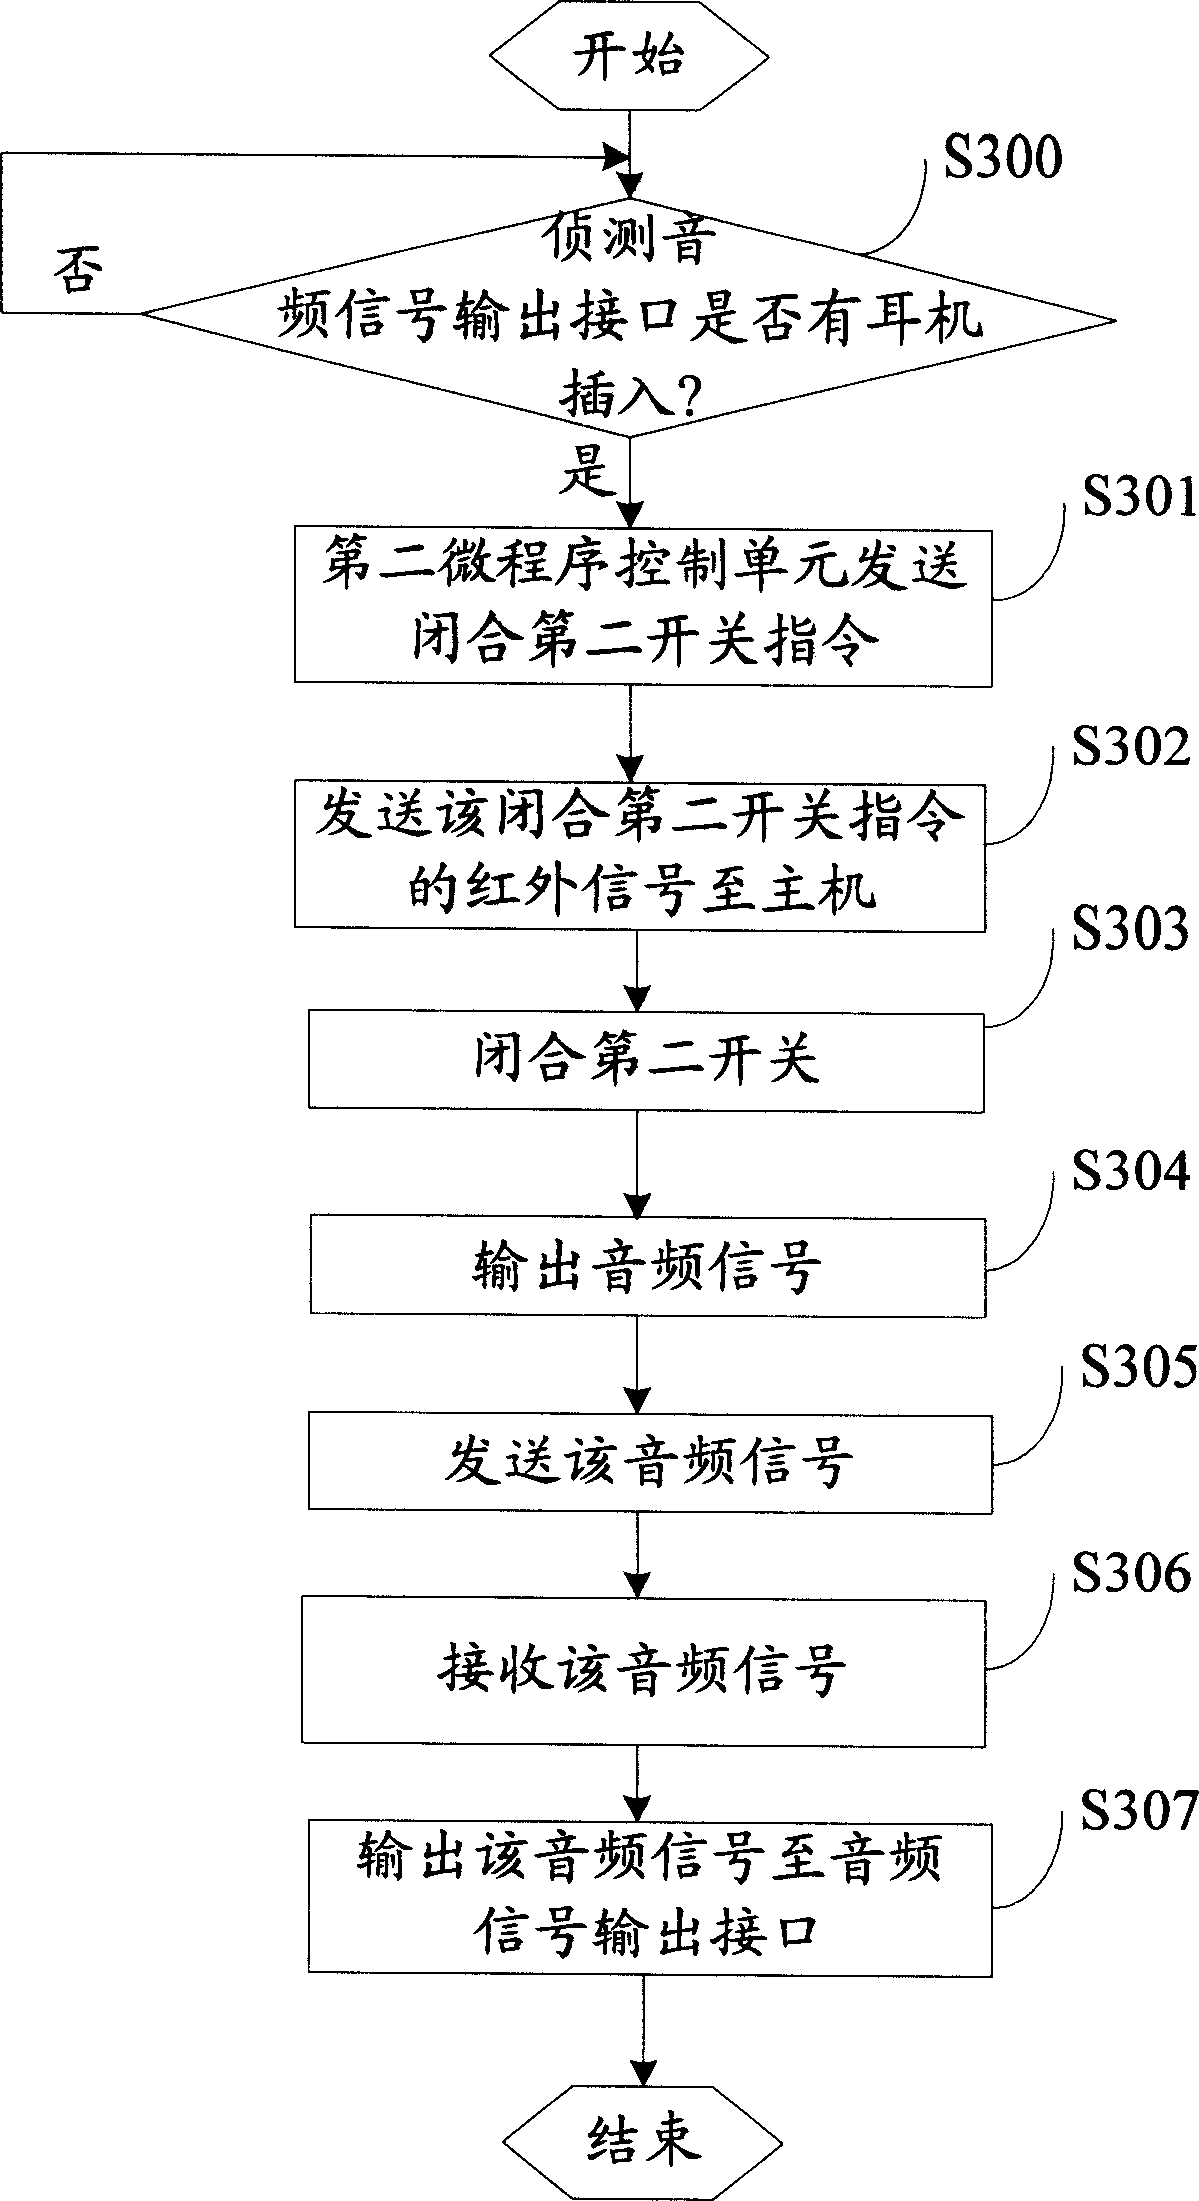 Remote control system with wireless earphone function and method thereof